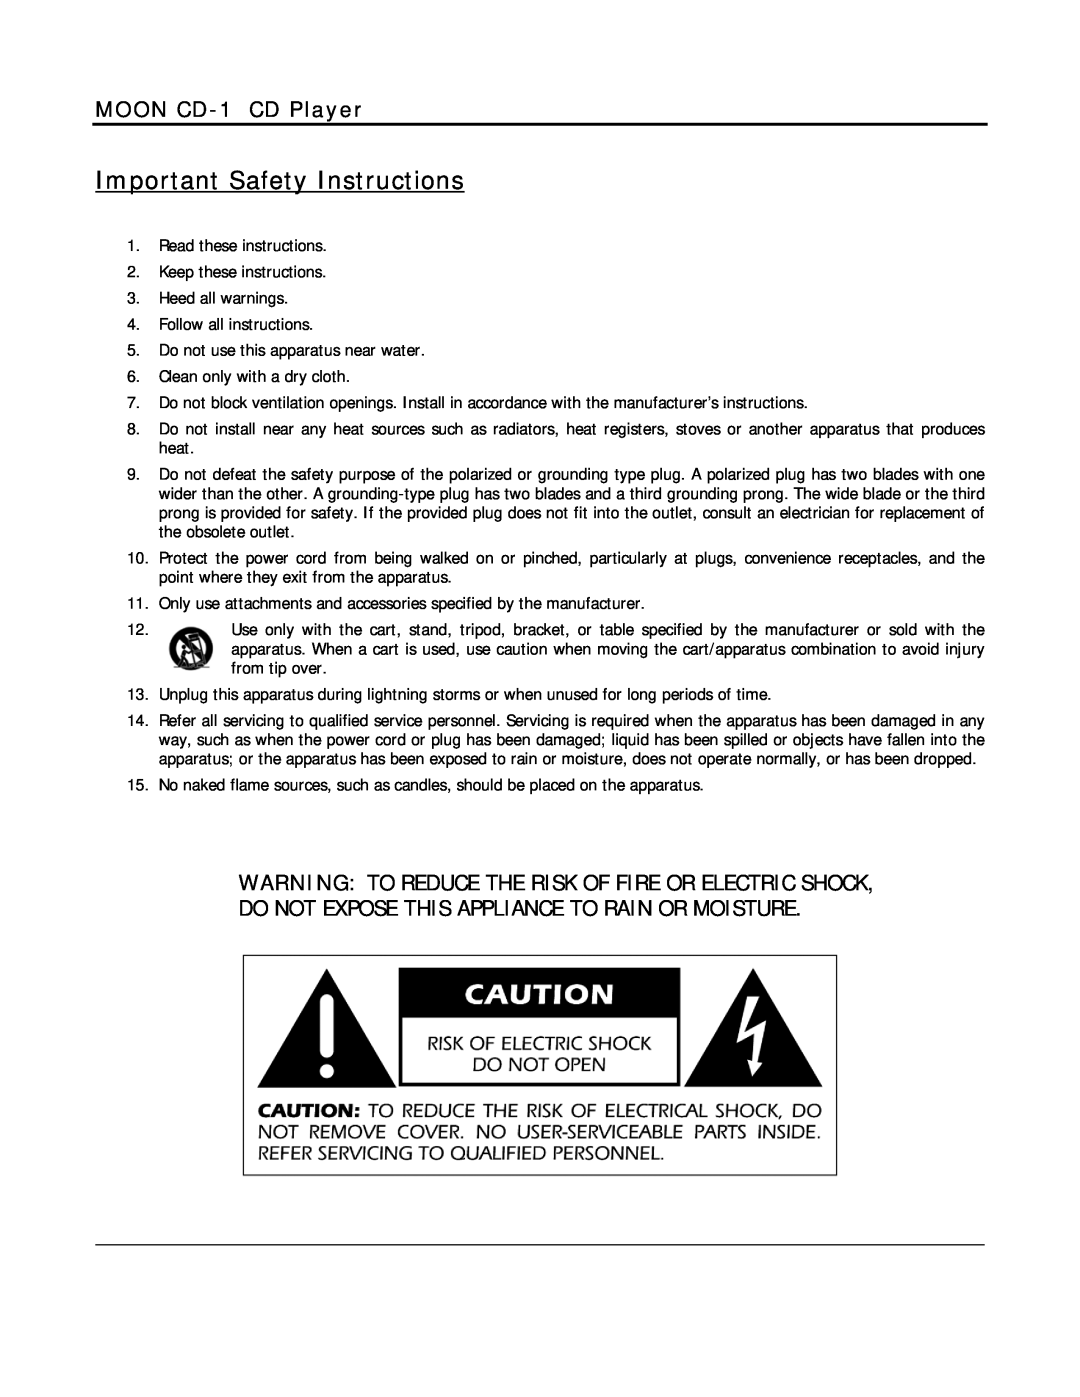 Simaudio Important Safety Instructions, MOON CD-1CD Player, Do Not Expose This Appliance To Rain Or Moisture 